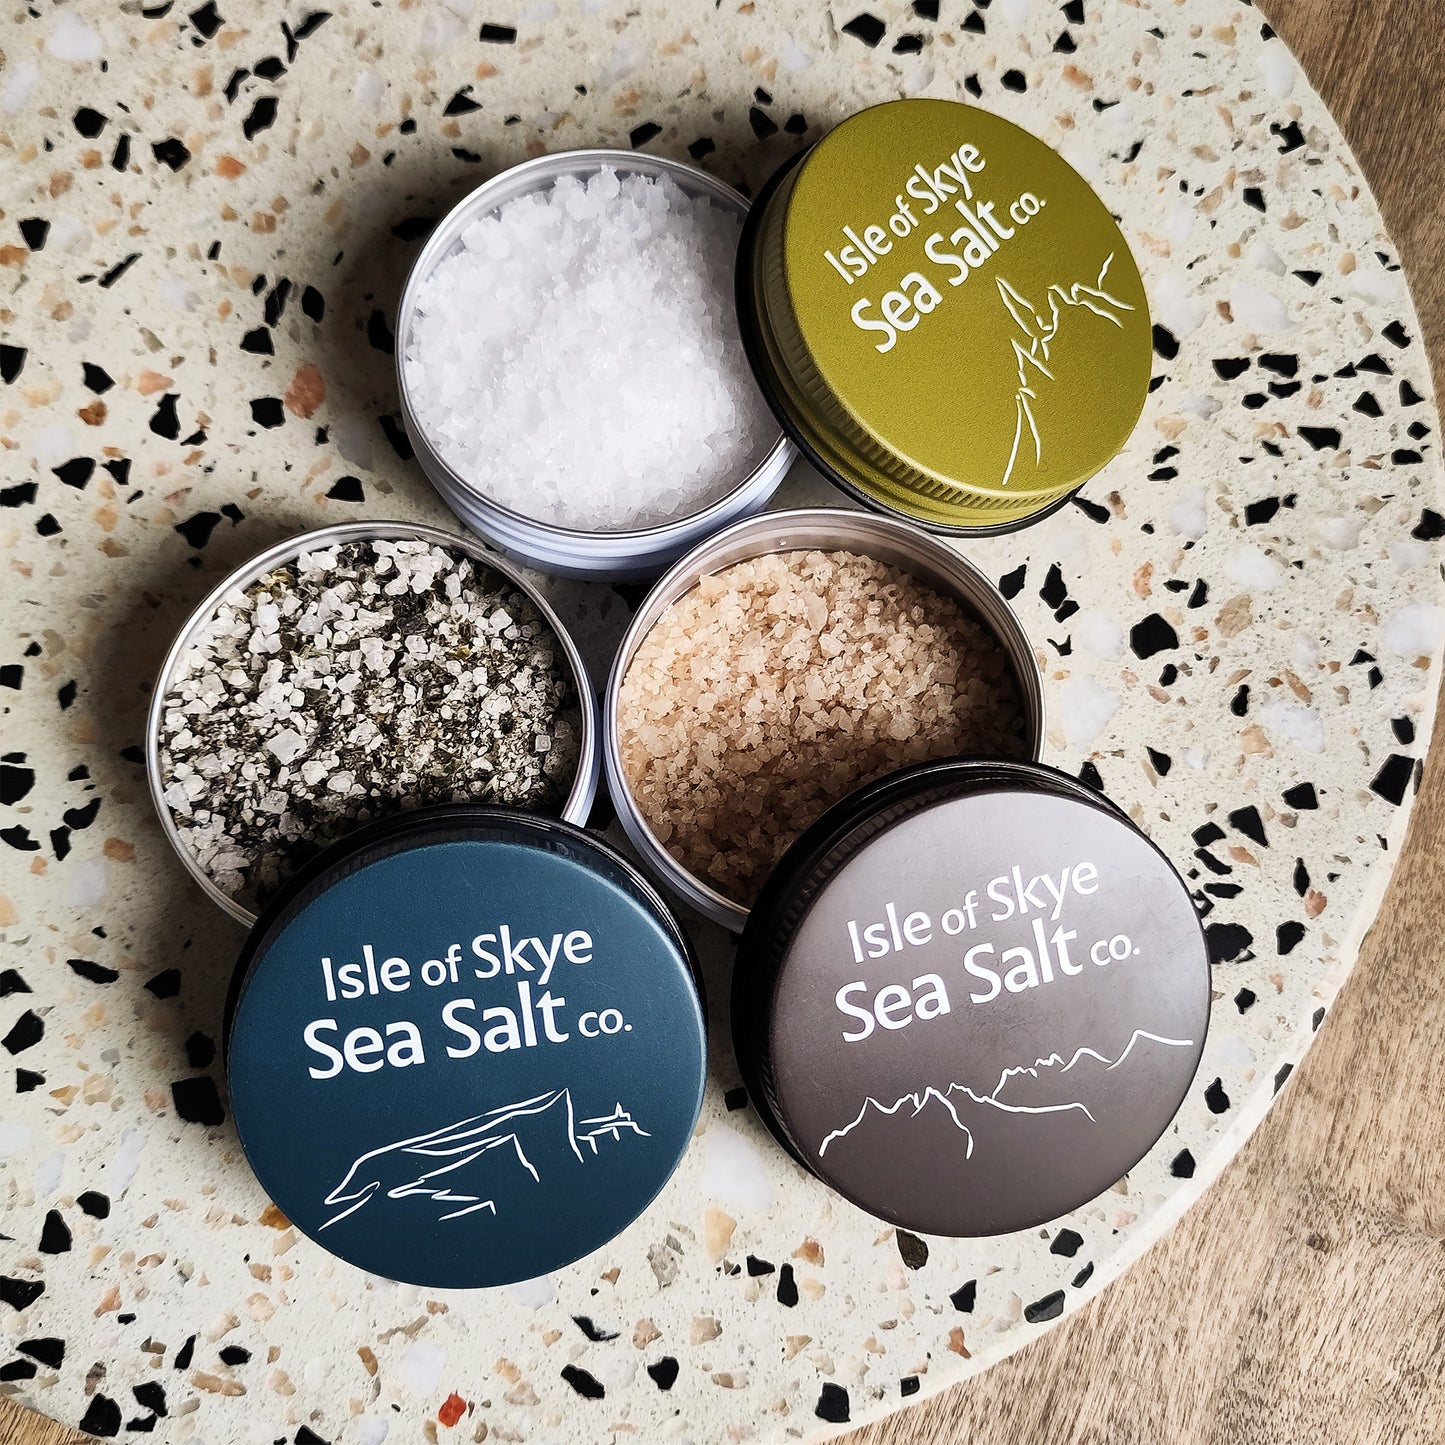 A Pinch of Skye - 3 x 25g Natural and Flavored Sea Salts Gift Set